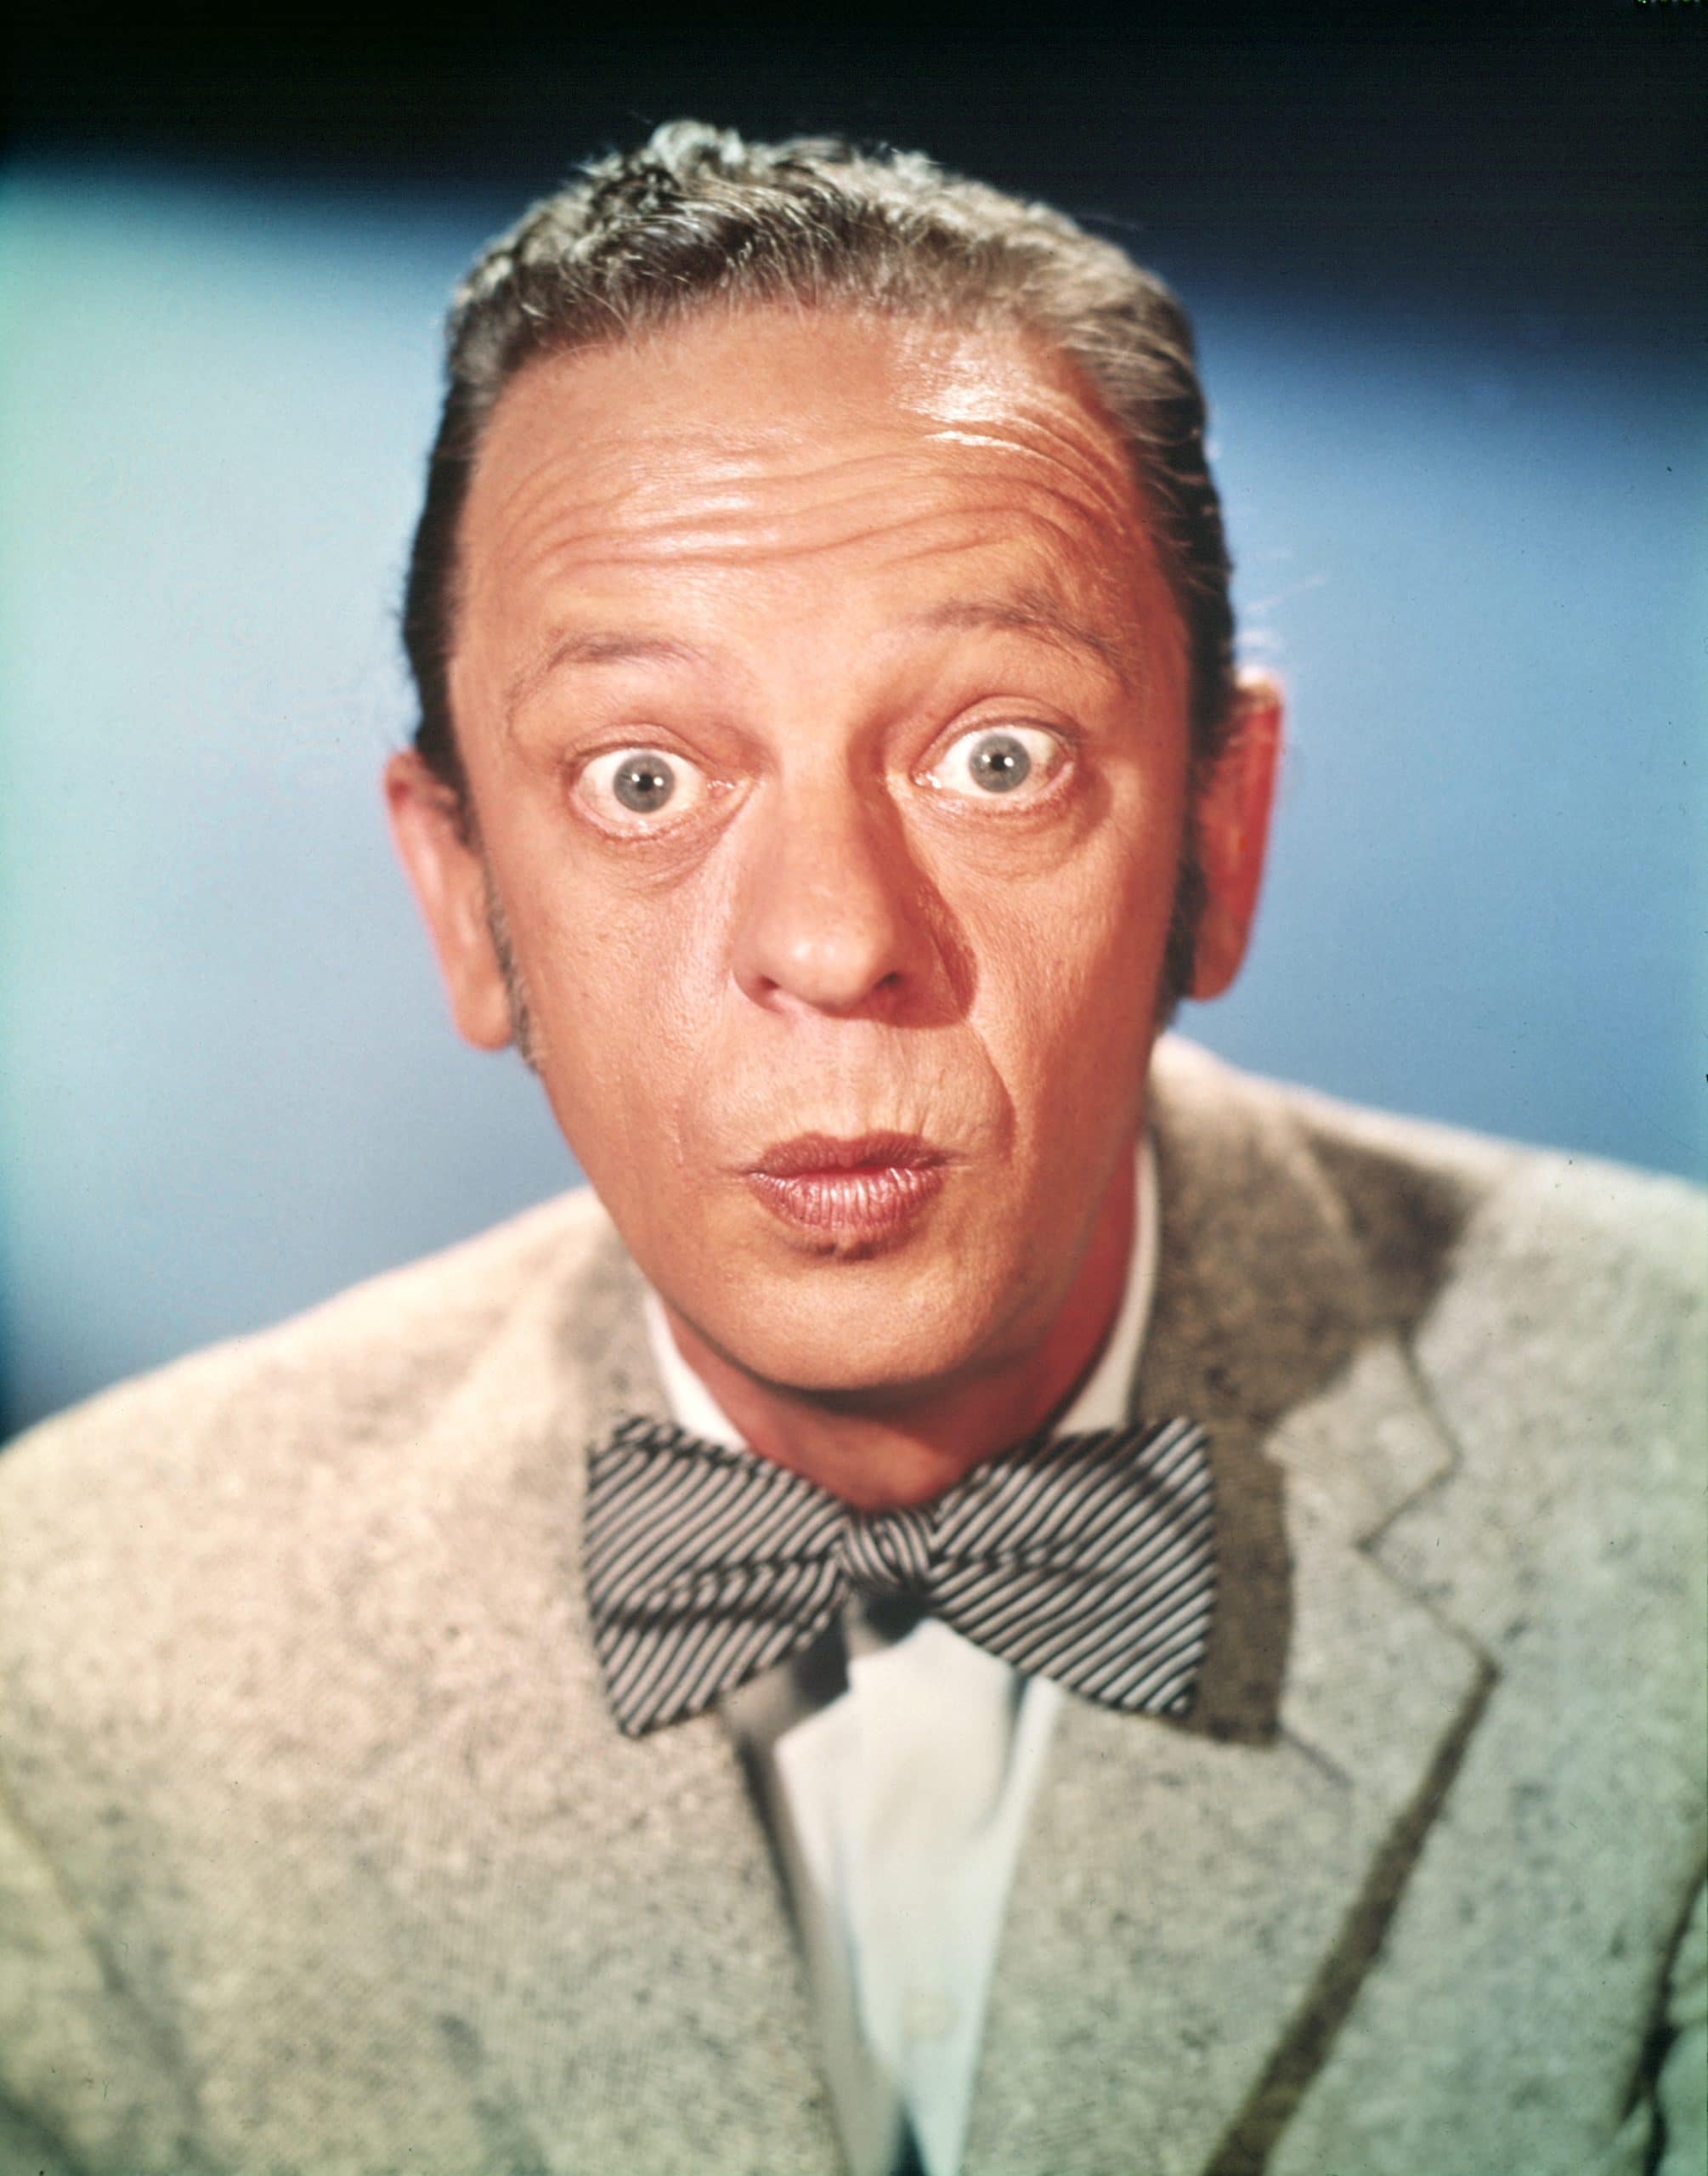 ANDY GRIFFITH SHOW, Don Knotts, 1960-1968